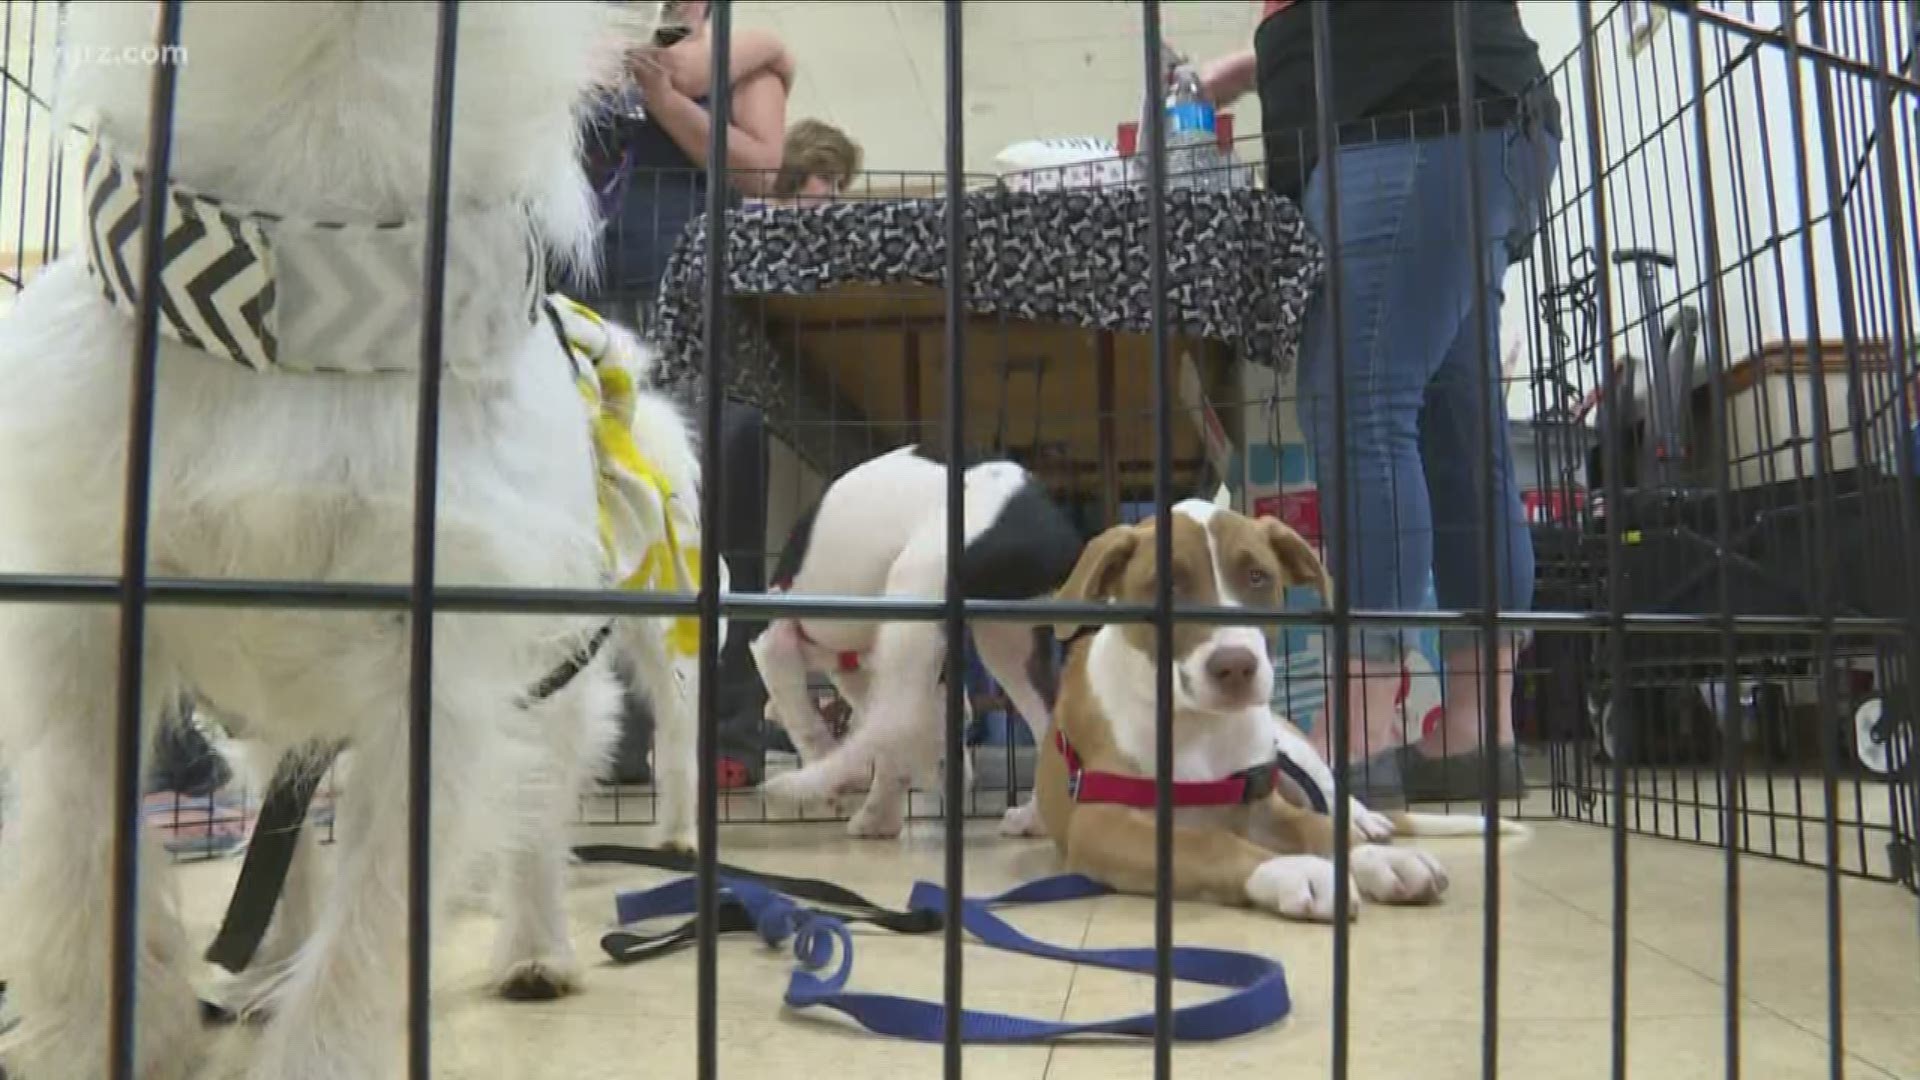 Several pet adoption agencies came together today to host Western New York's "furtastic adopt a thon."
They teamed up with the Erie County health department.